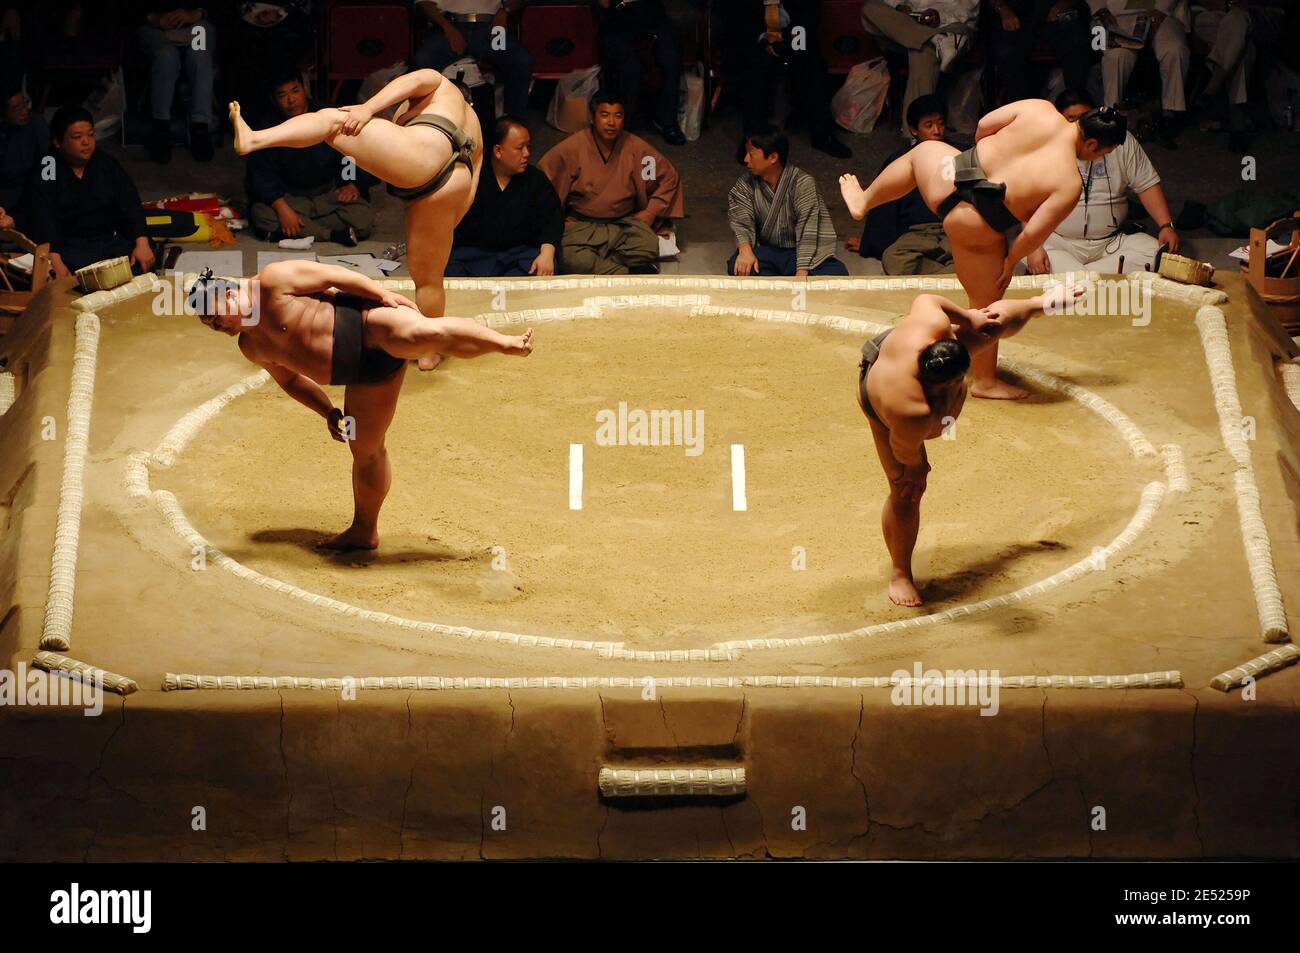 Japan's Sumo Wrestlers demonstrate Sumo Wrestling moves in the Sumo Ring  (Dohyo) Prior to the start of Day two of the Grand Sumo Tournament at the  L.A. Sports Arena 2008 in Los